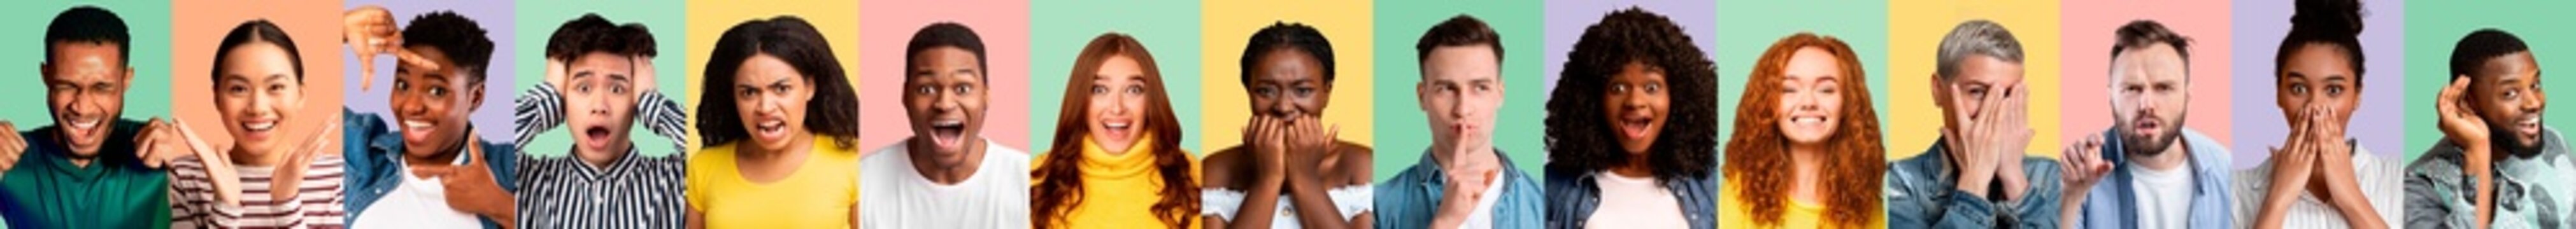 Multiracial people posing on colorful backgrounds, collection of emotional photos